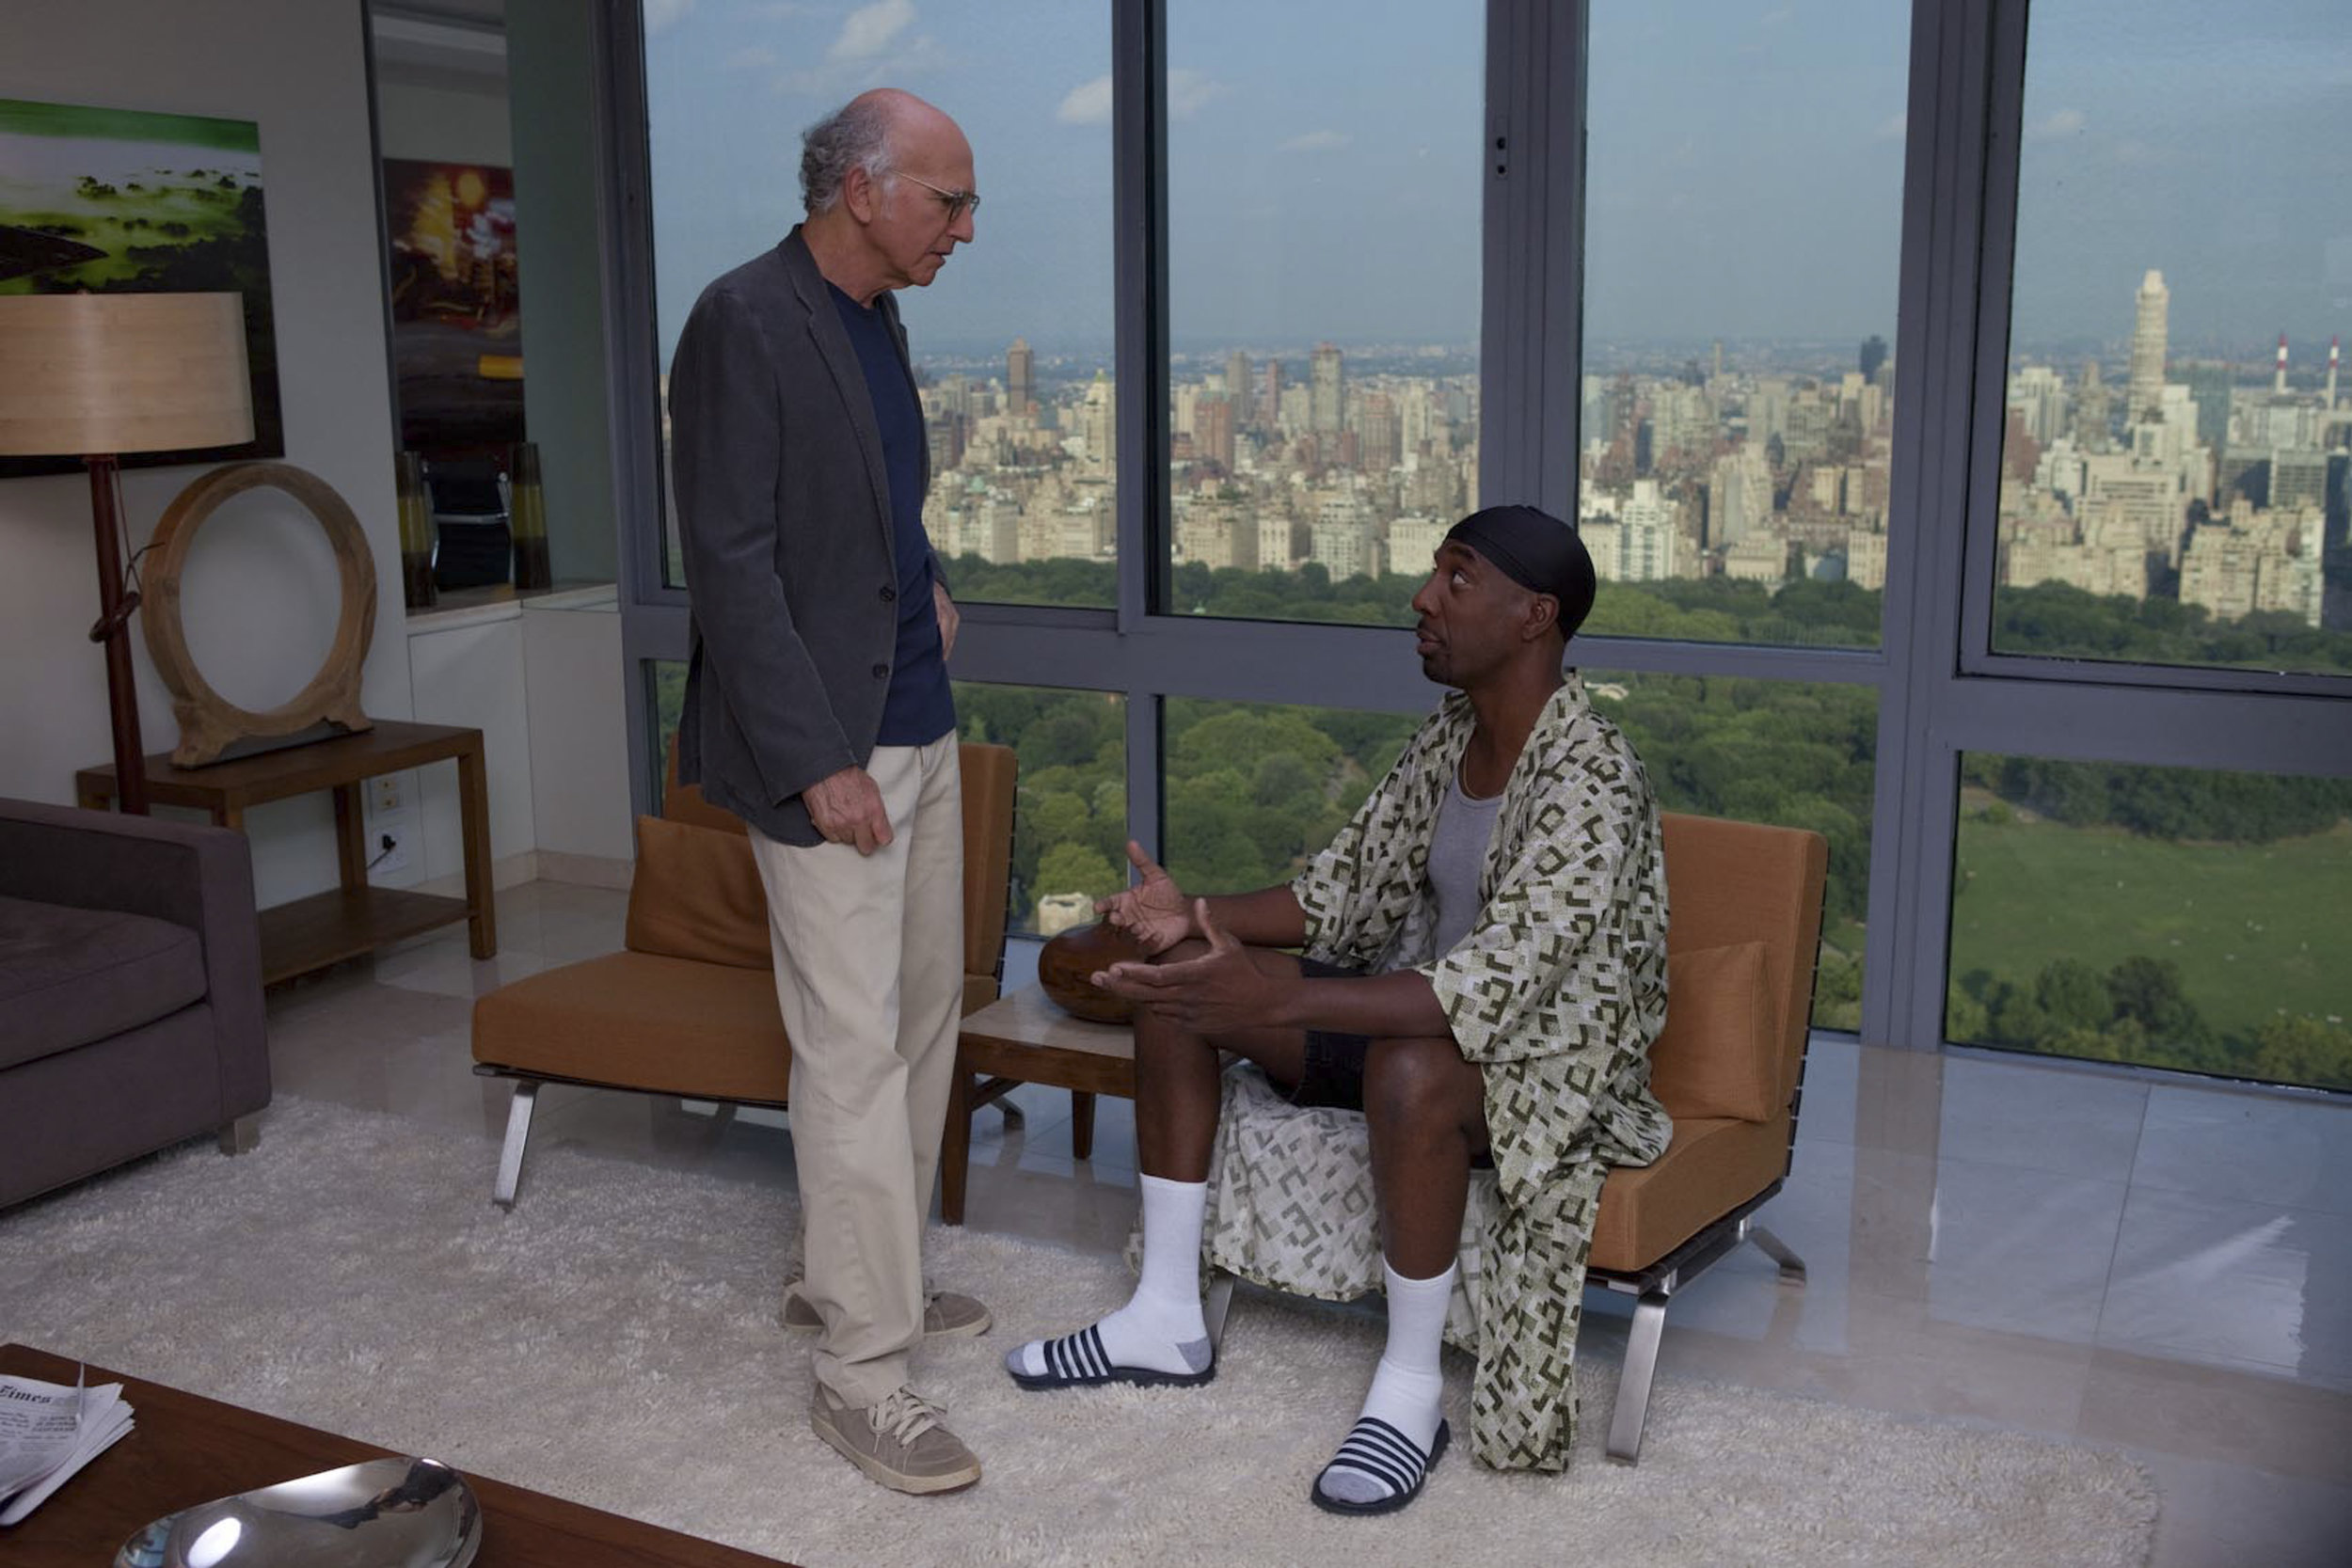  "Curb Your Enthusiasm" courtesy of © HBO 